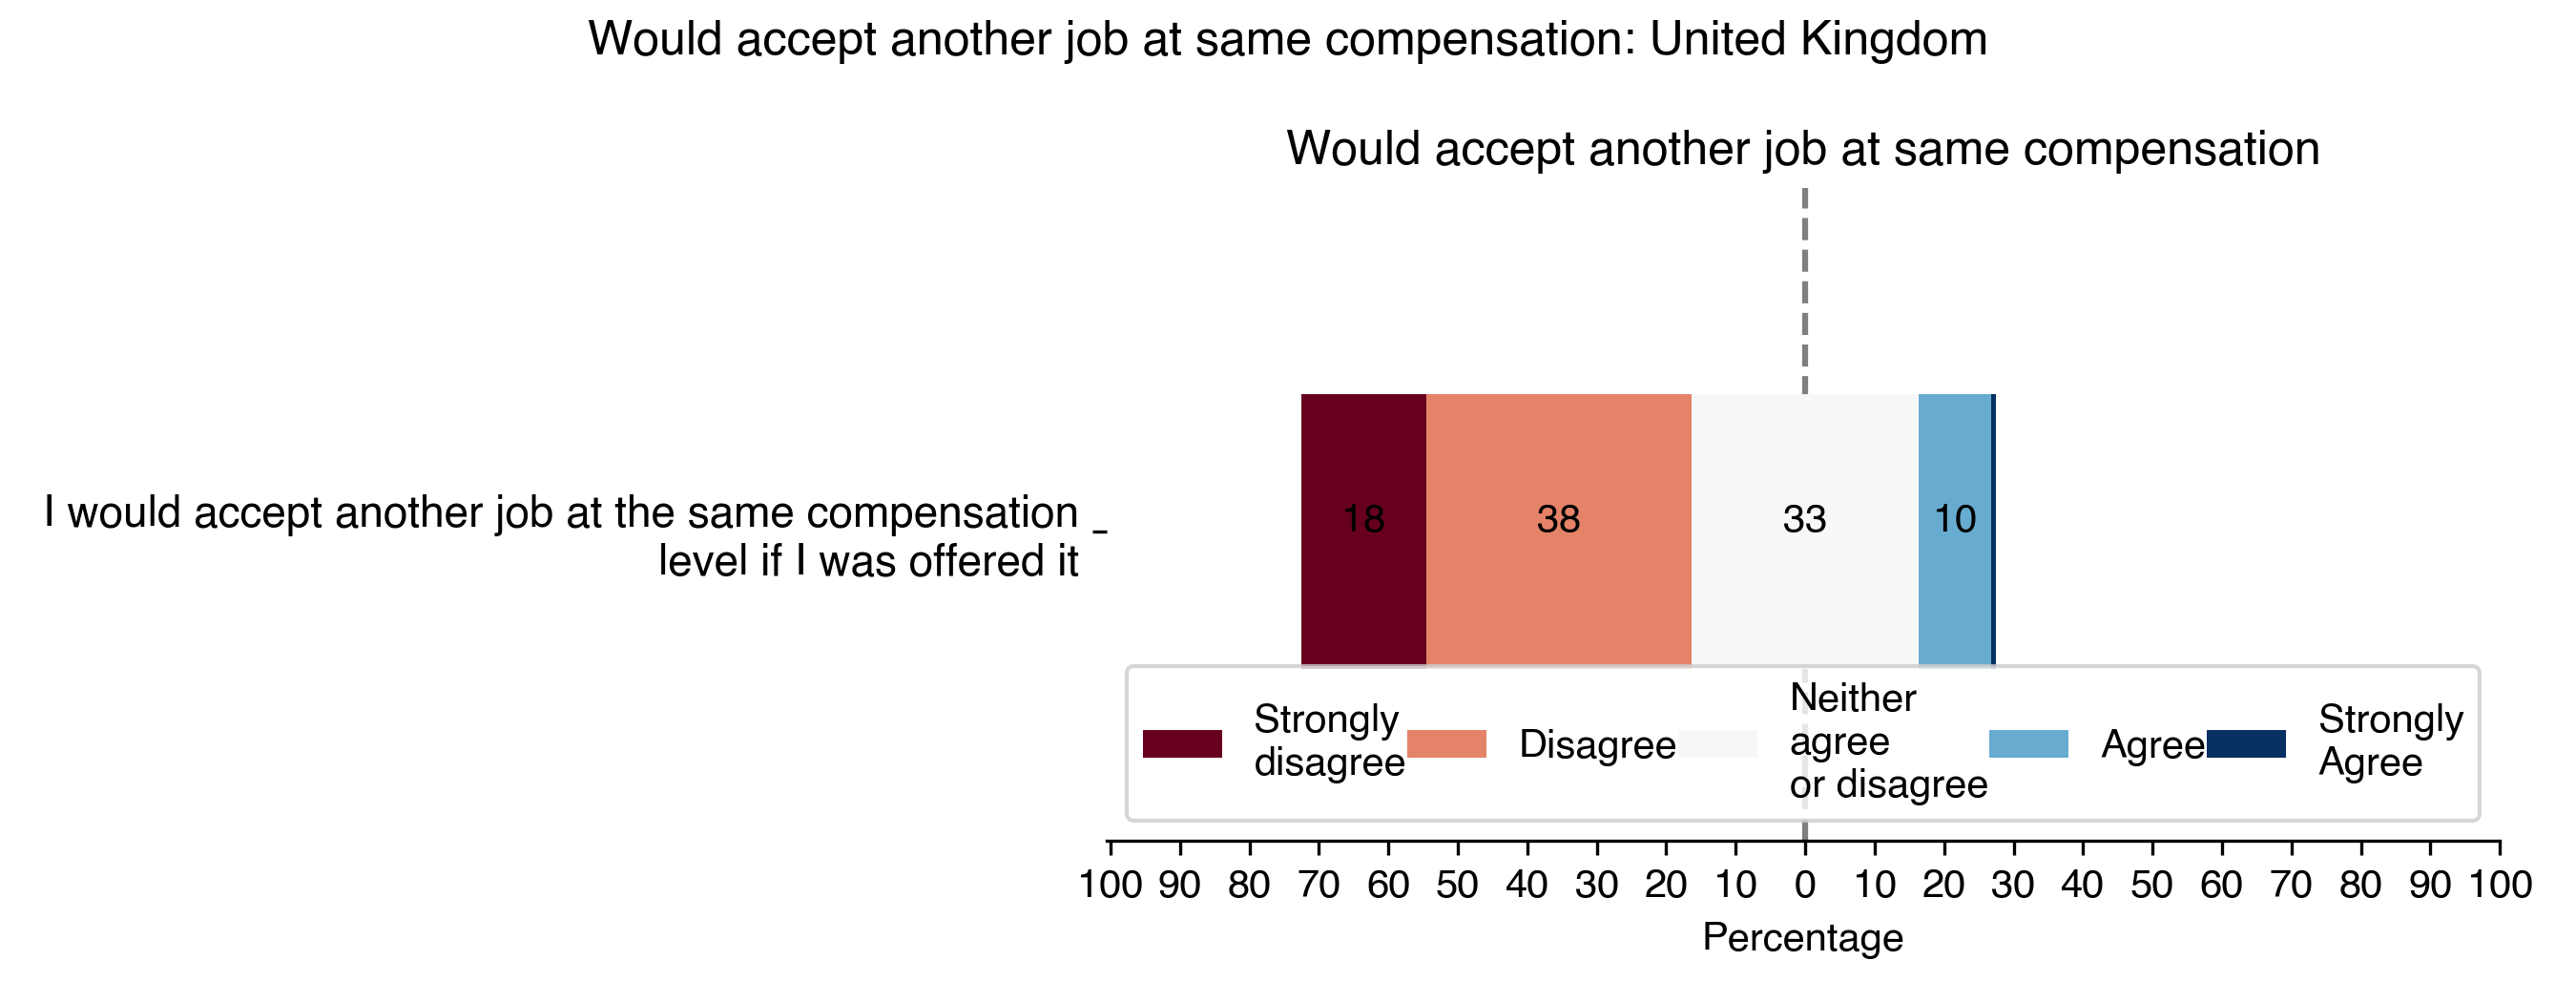 would-accept-another-job-at-same-compensation